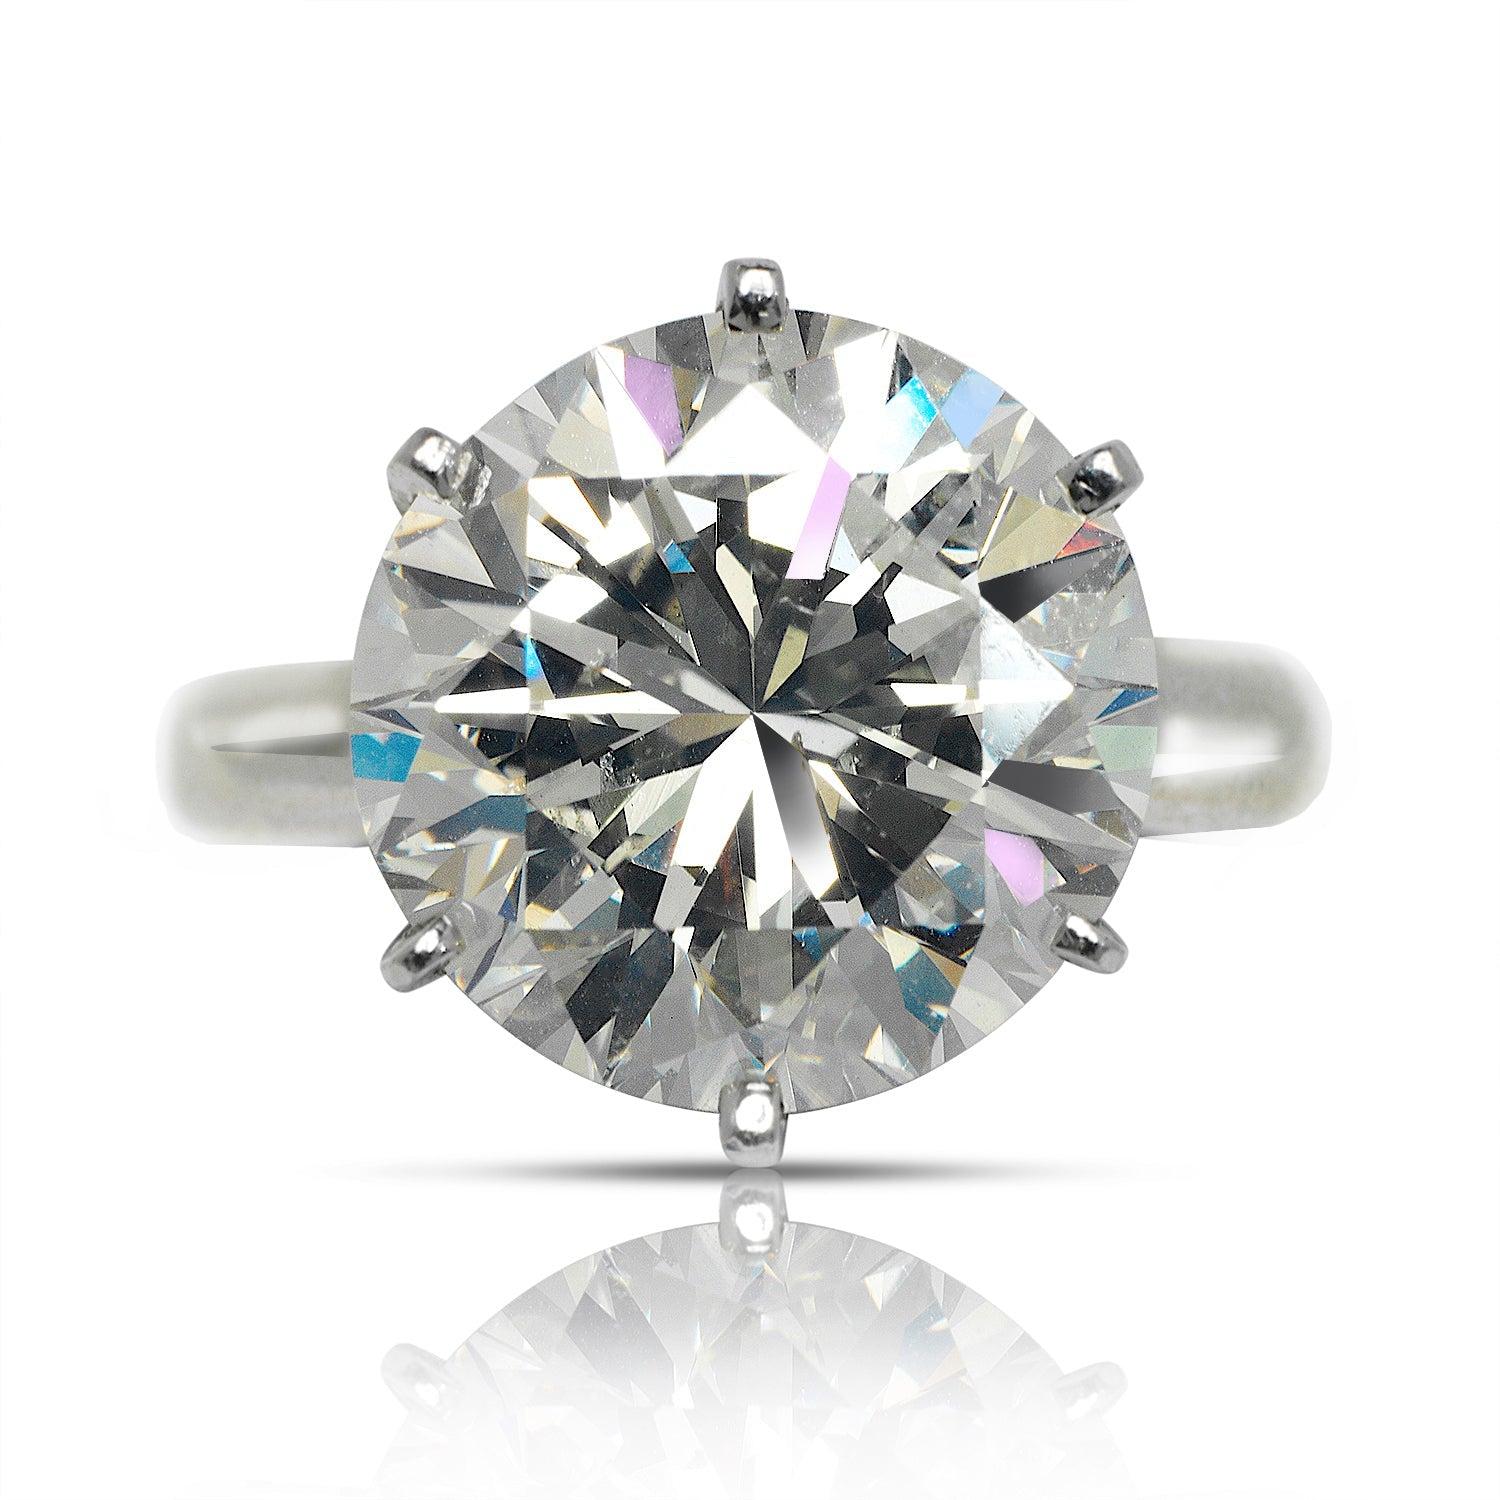 YANA ROUND CUT DIAMOND ENGAGEMENT RING 14K WHITE GOLD BY MIKE NEKTA

Center Diamond
Carat Weight: 10 Carats
Color:  I
Clarity: VS2
Style:  ROUND BRILLIANT 
Measurements:  13.1 x 13.5 x 8.8 mm

Ring:
Metal: 14K WHITE GOLD 
Metal Weight: 9 GR
Style: